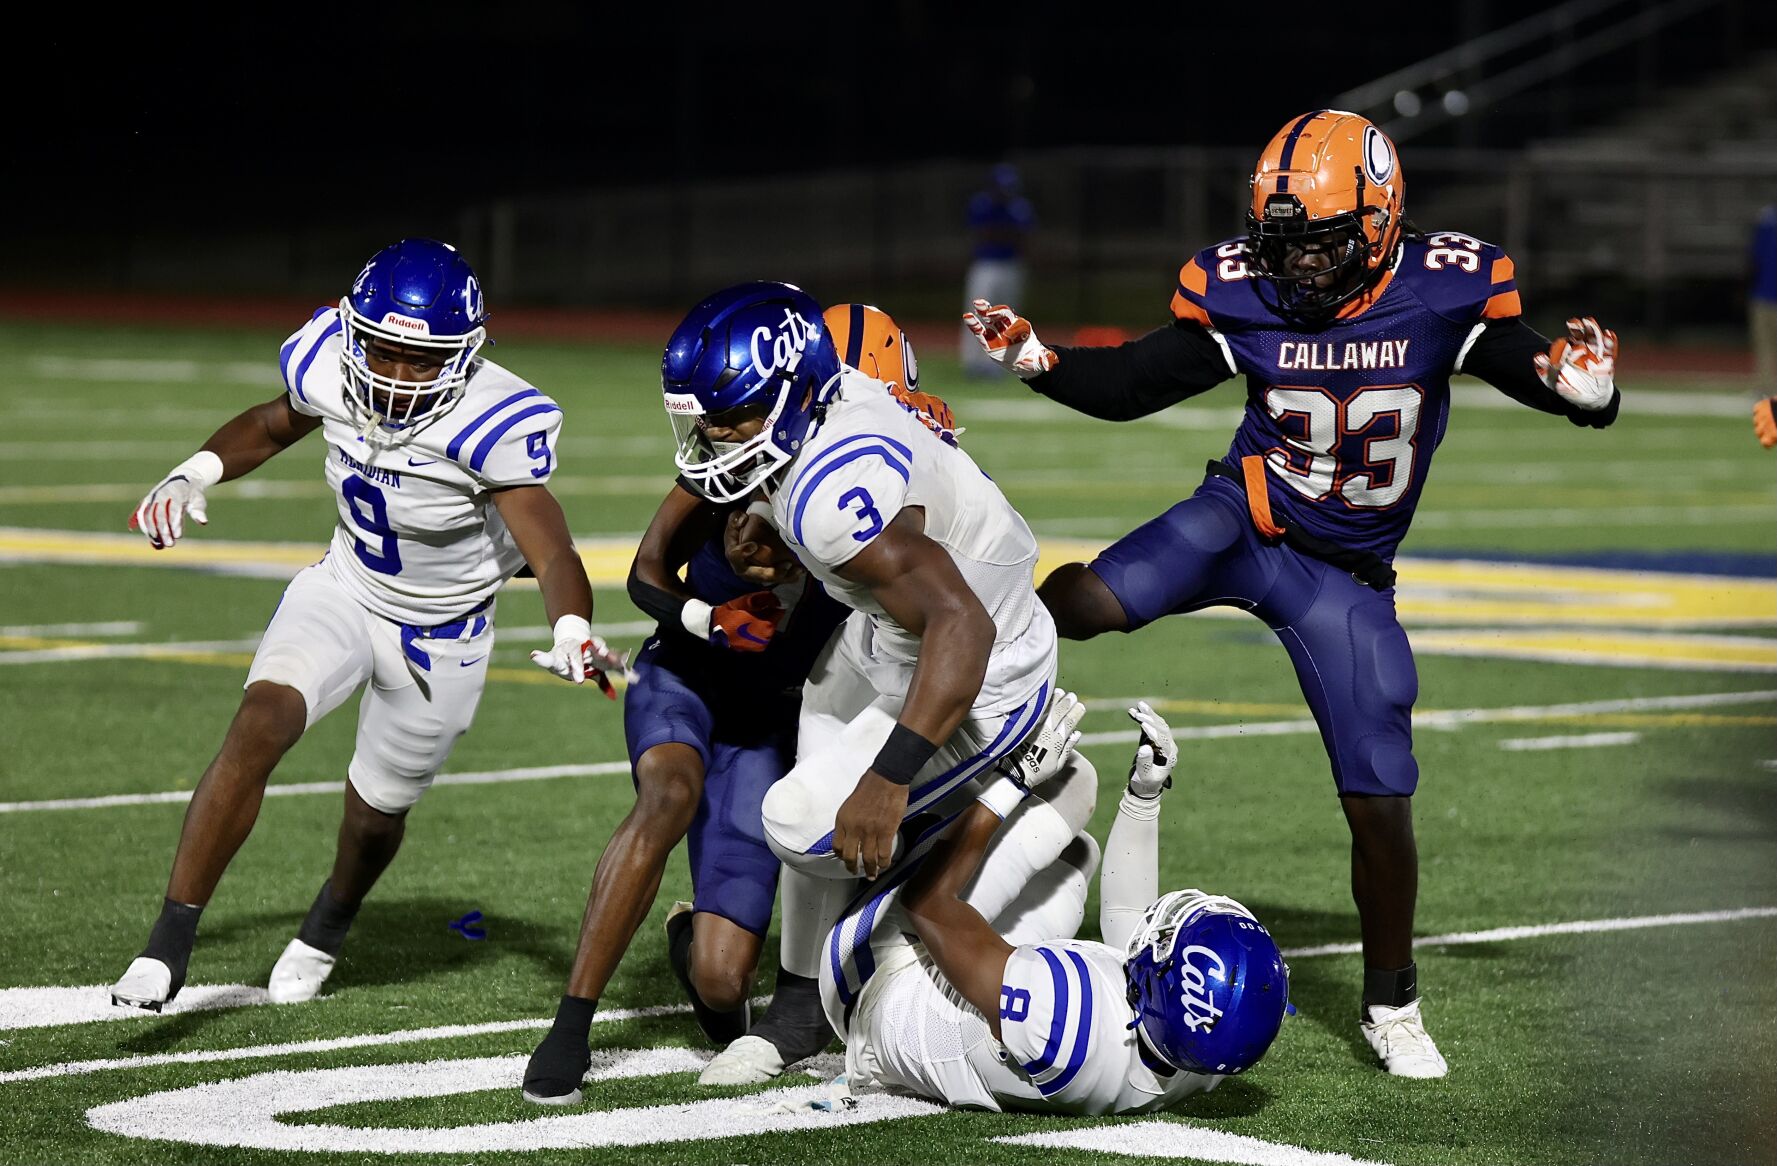 Meridian’s defense shines with four turnovers, while Daniel Hill leads offense with 151 rushing yards